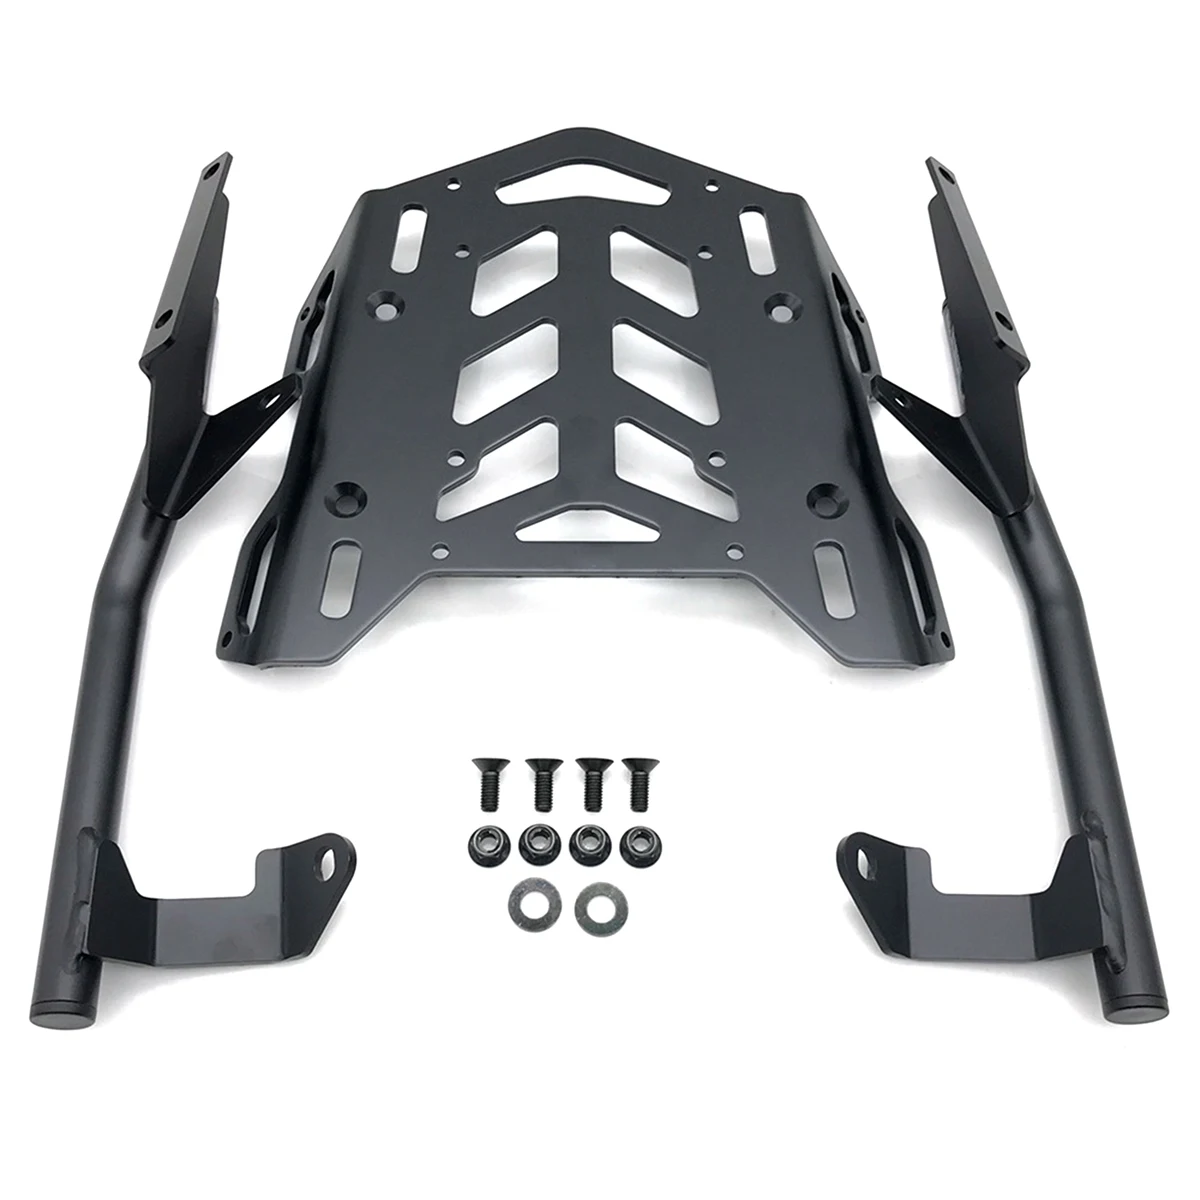 

For YAMAHA MT-09 TRACER900/ GT 2018-2021 Rear Luggage Box Case Tail Frame Shelves Bracket Motorcycle Accessories